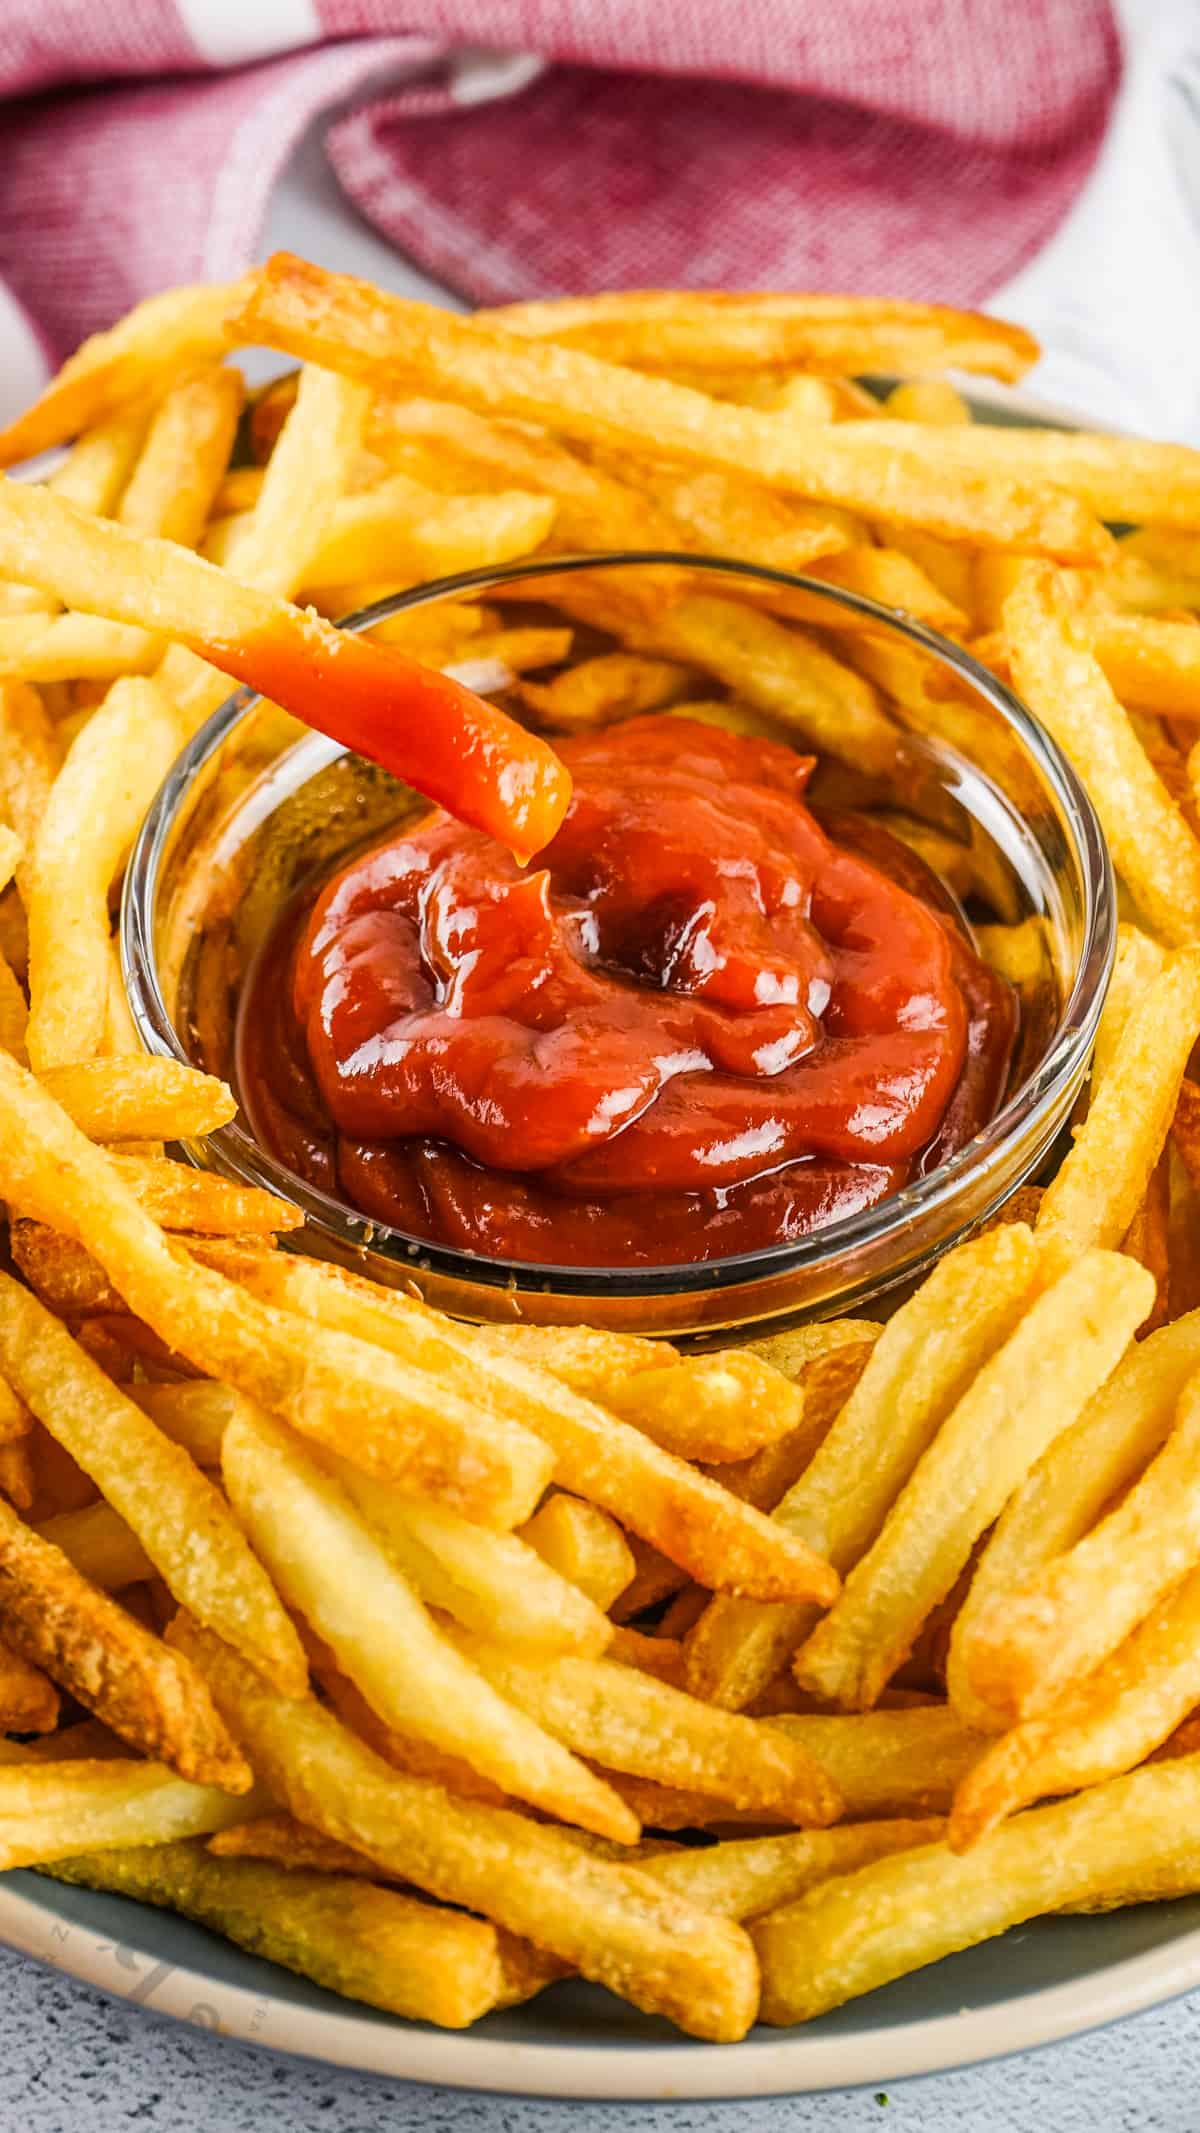 dipping Air Fryer Frozen French Fries in ketchup